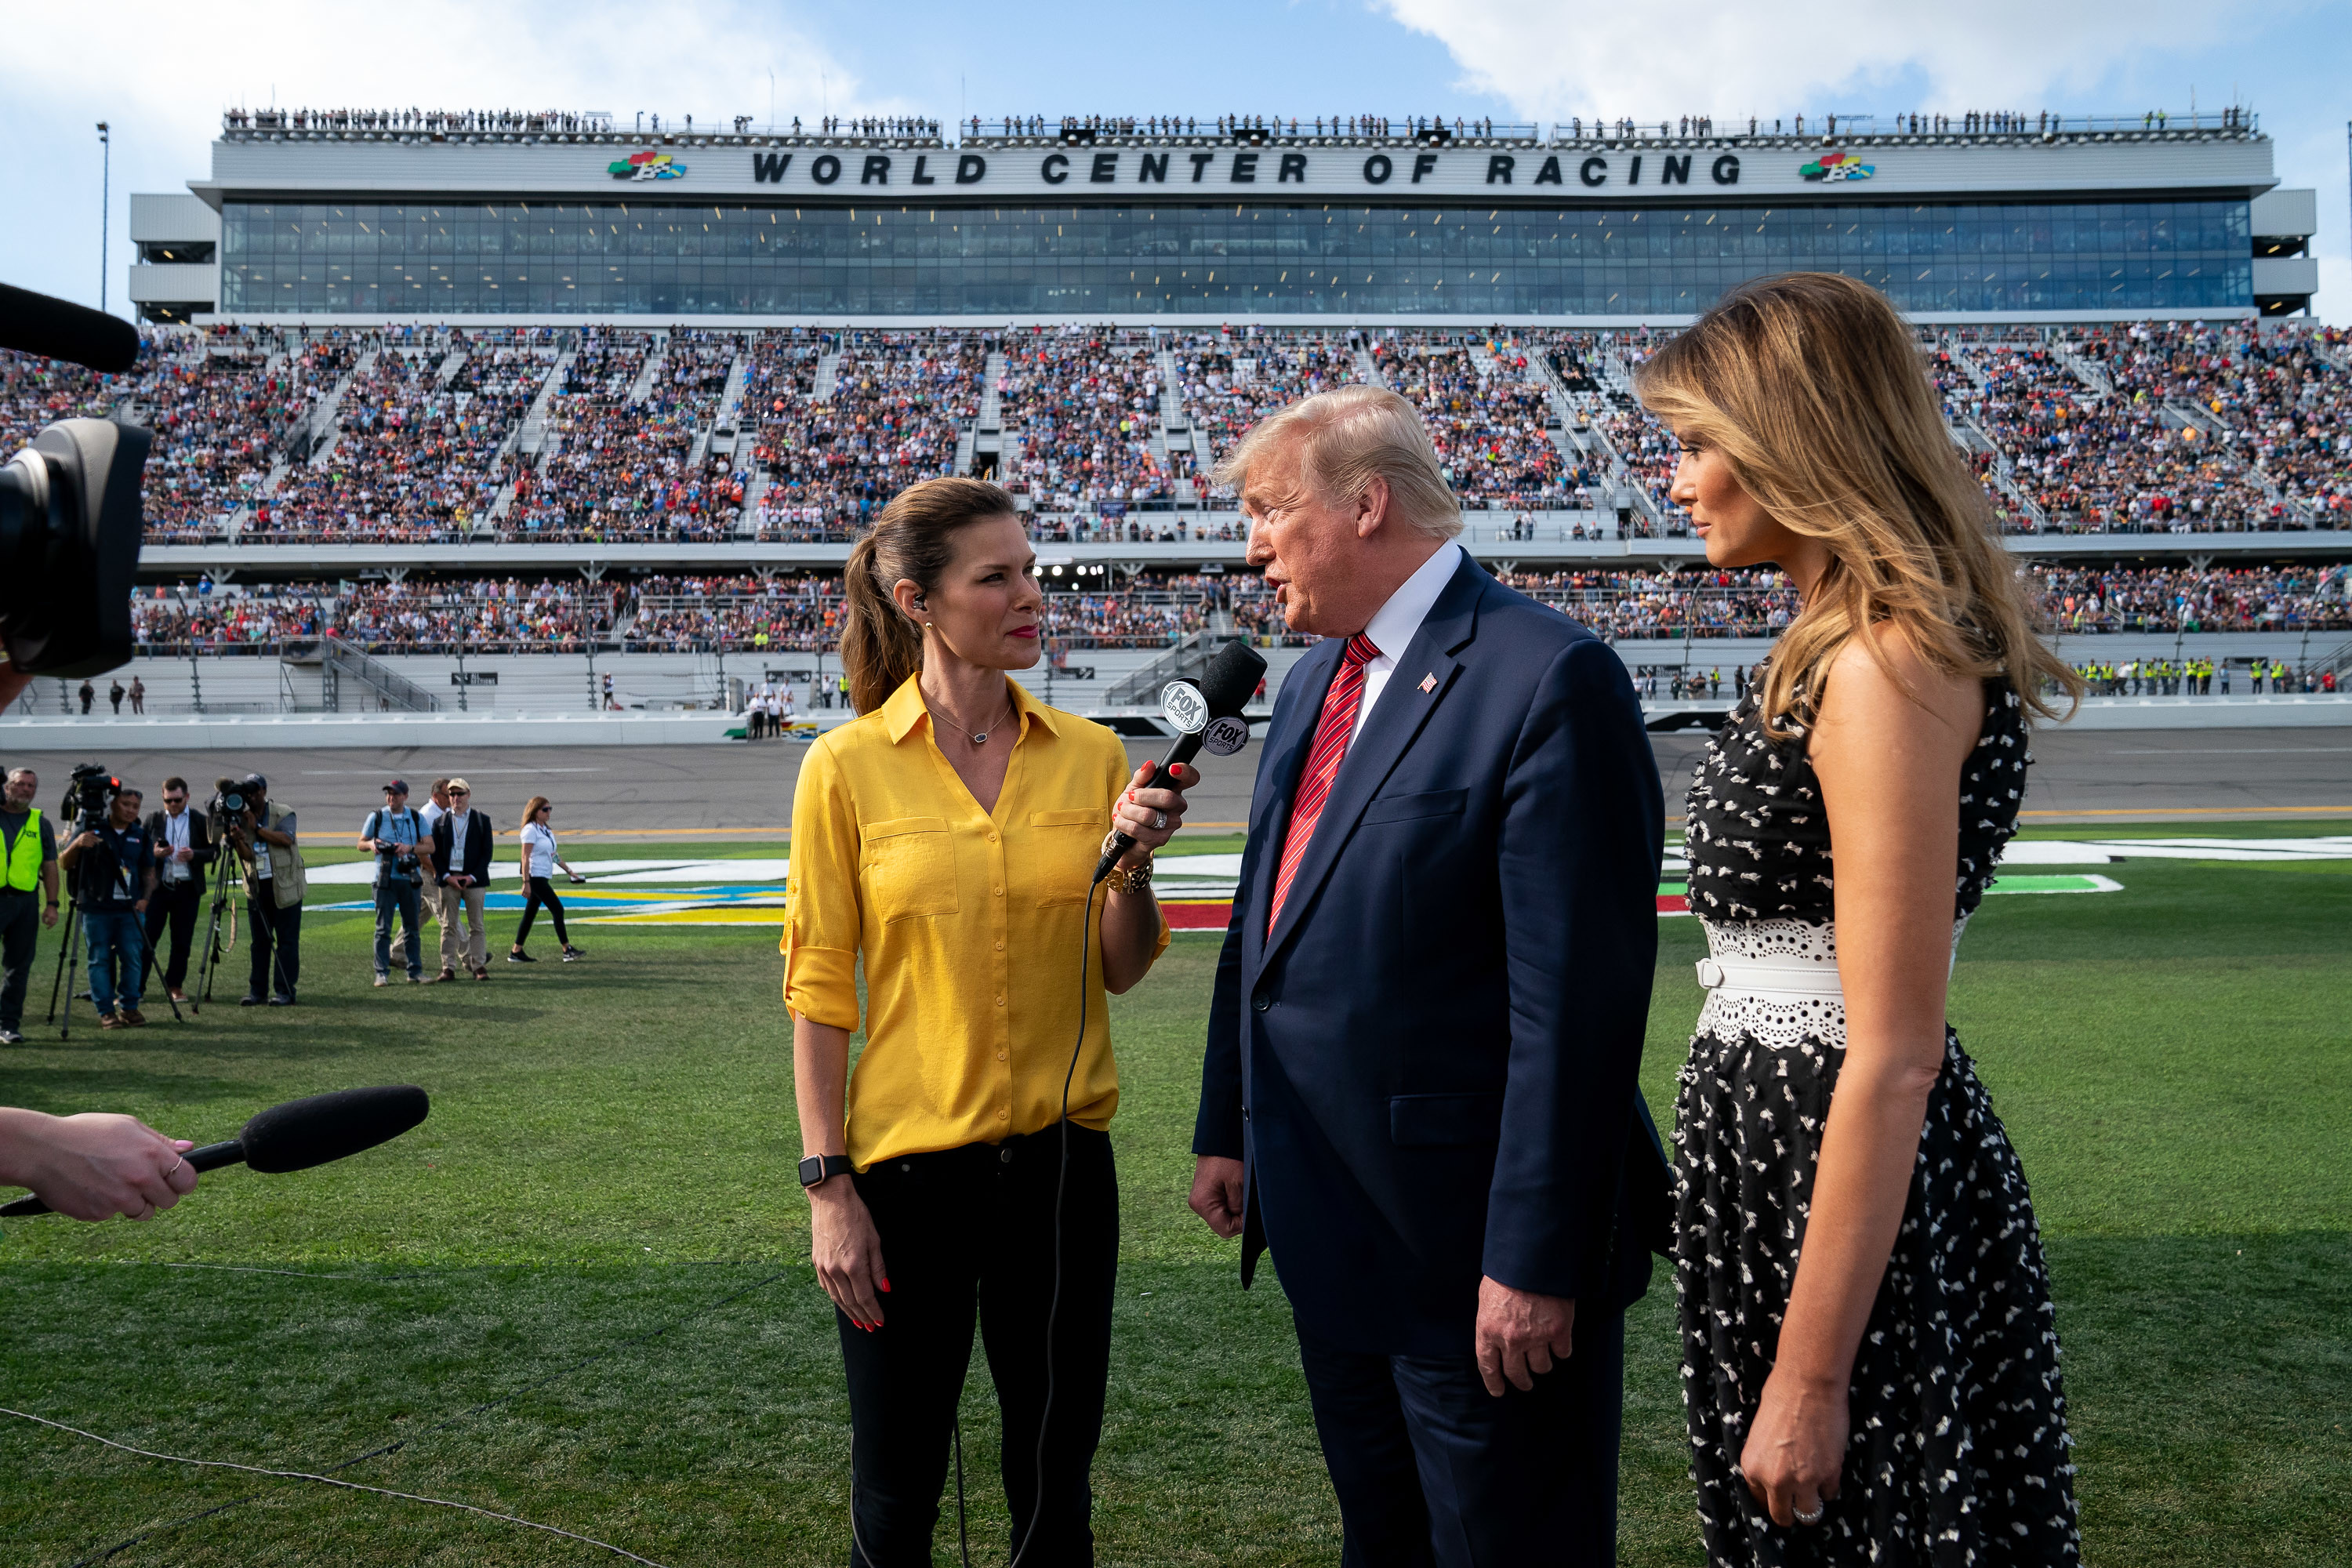 President Trump and the First Lady at the NASCAR Daytona 500 Race